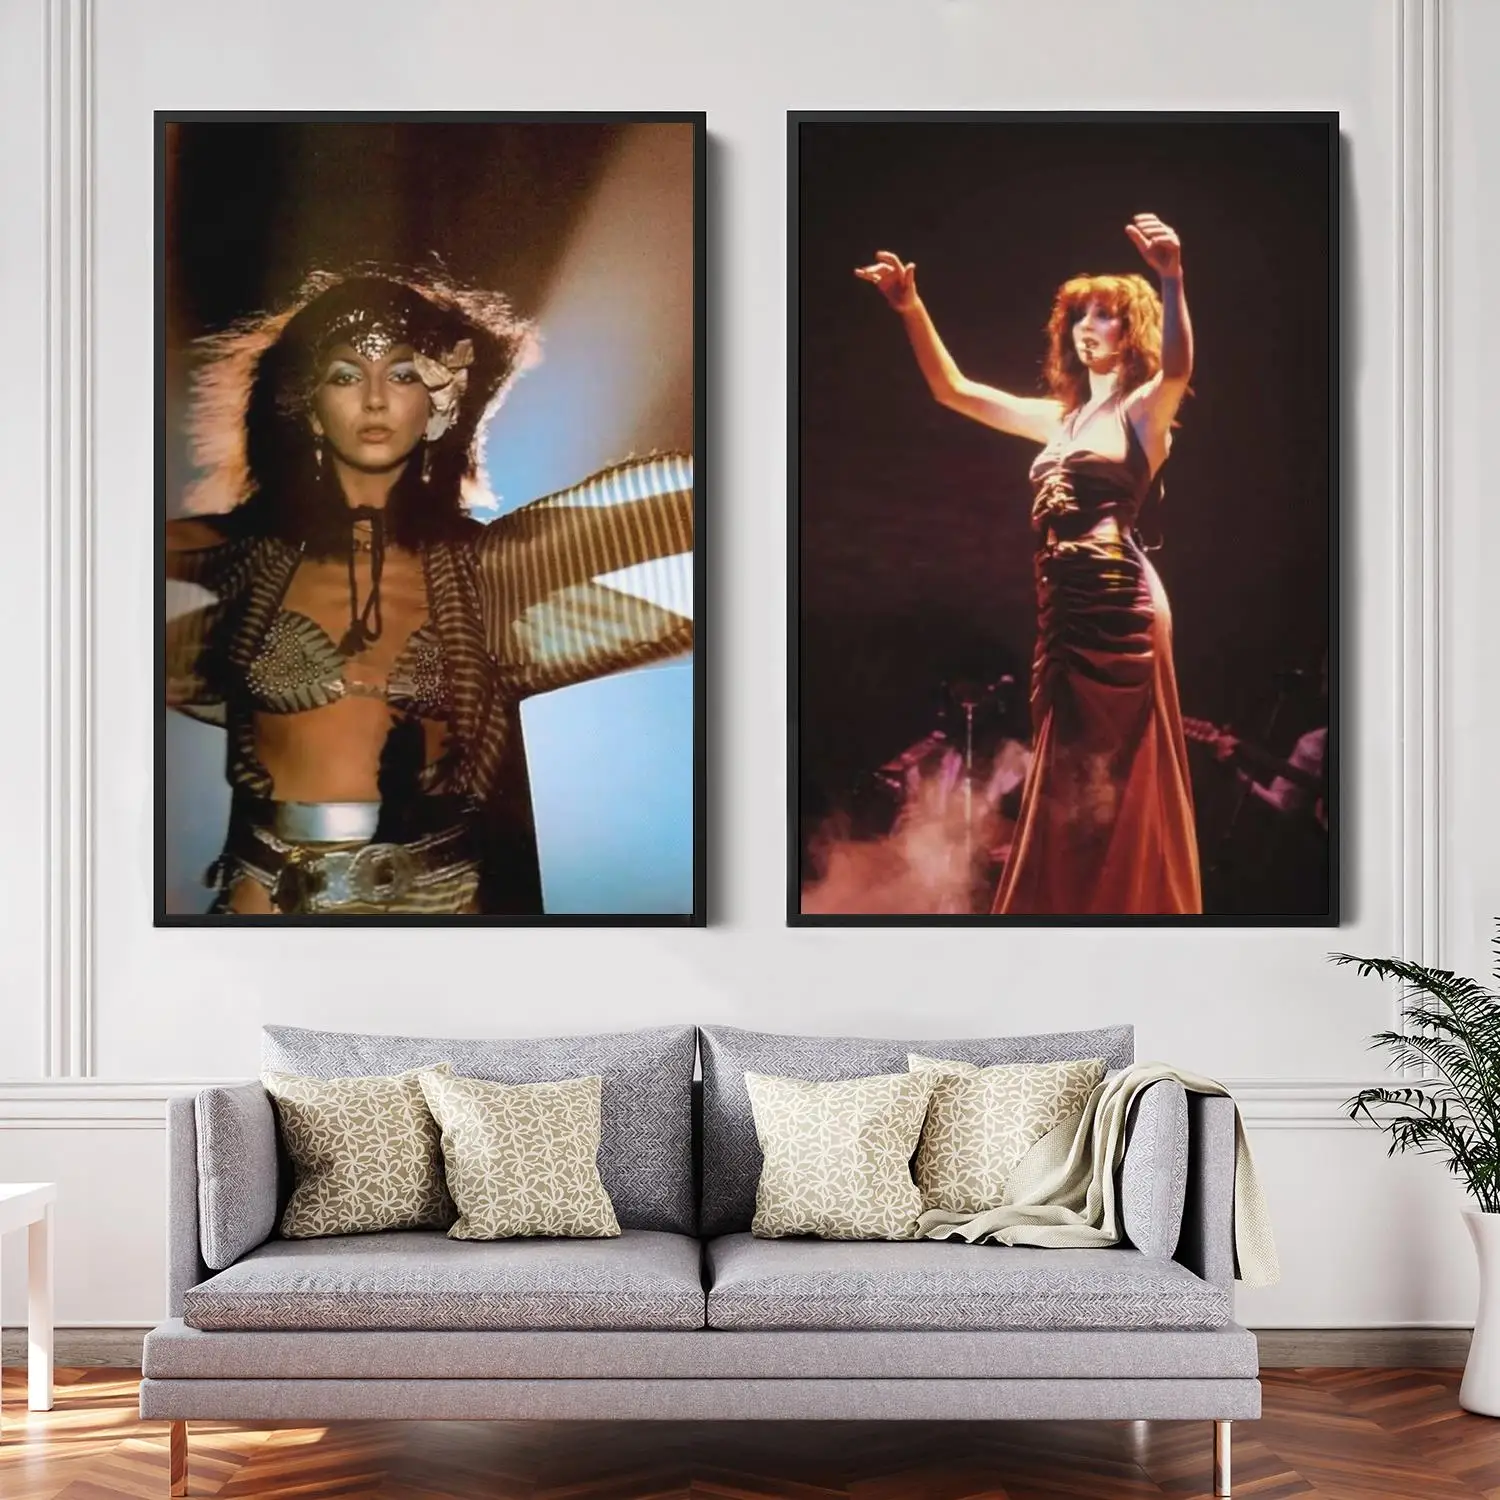 

kate bush Singer Decorative Canvas Posters Room Bar Cafe Decor Gift Print Art Wall Paintings